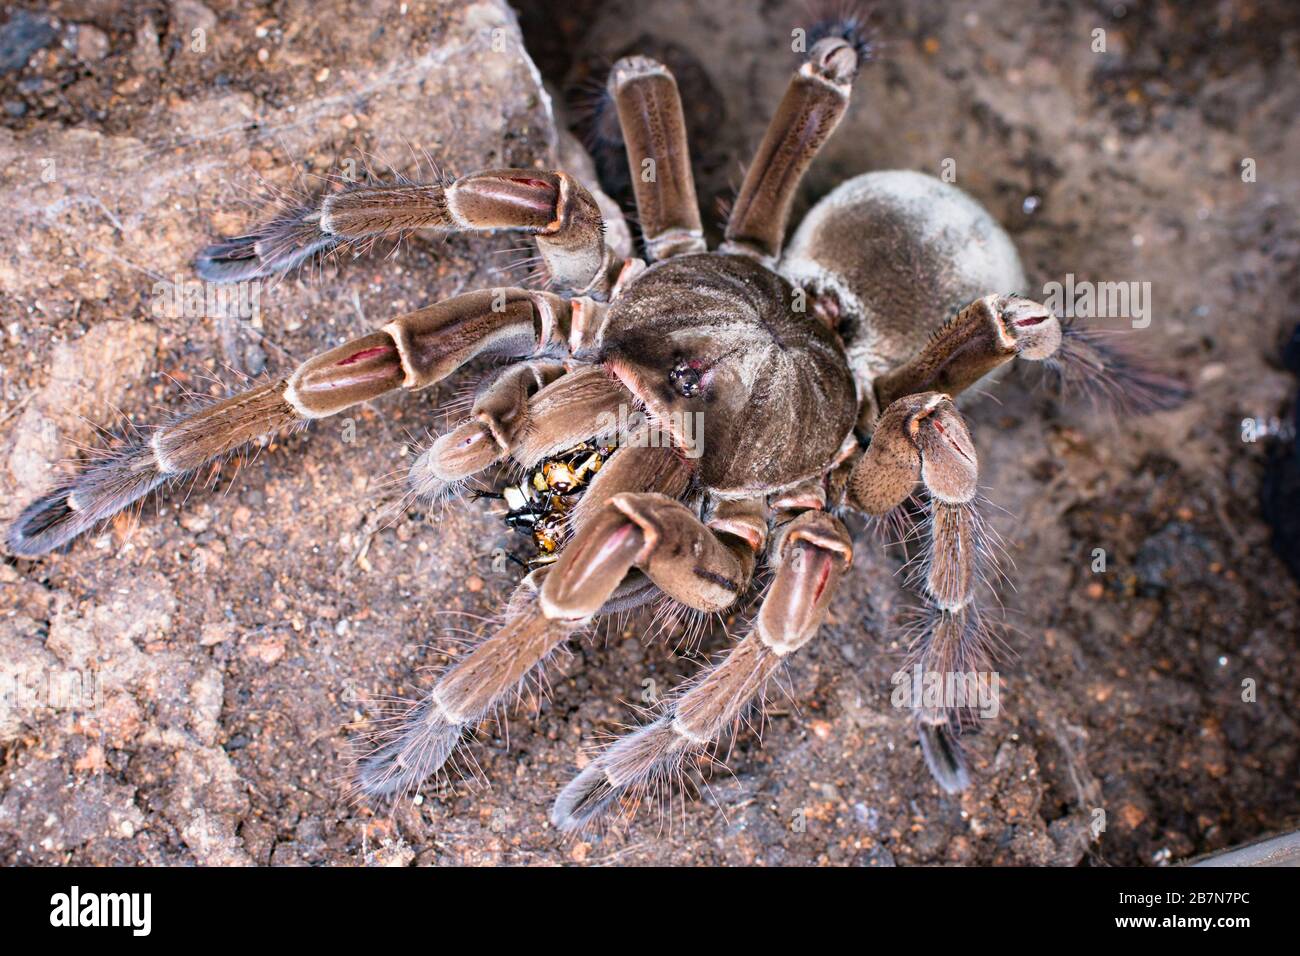 Sub-adult female of Theraphosa Stirmi, one of the largest tarantula(Theraphosidae) spieces from South America. Stock Photo